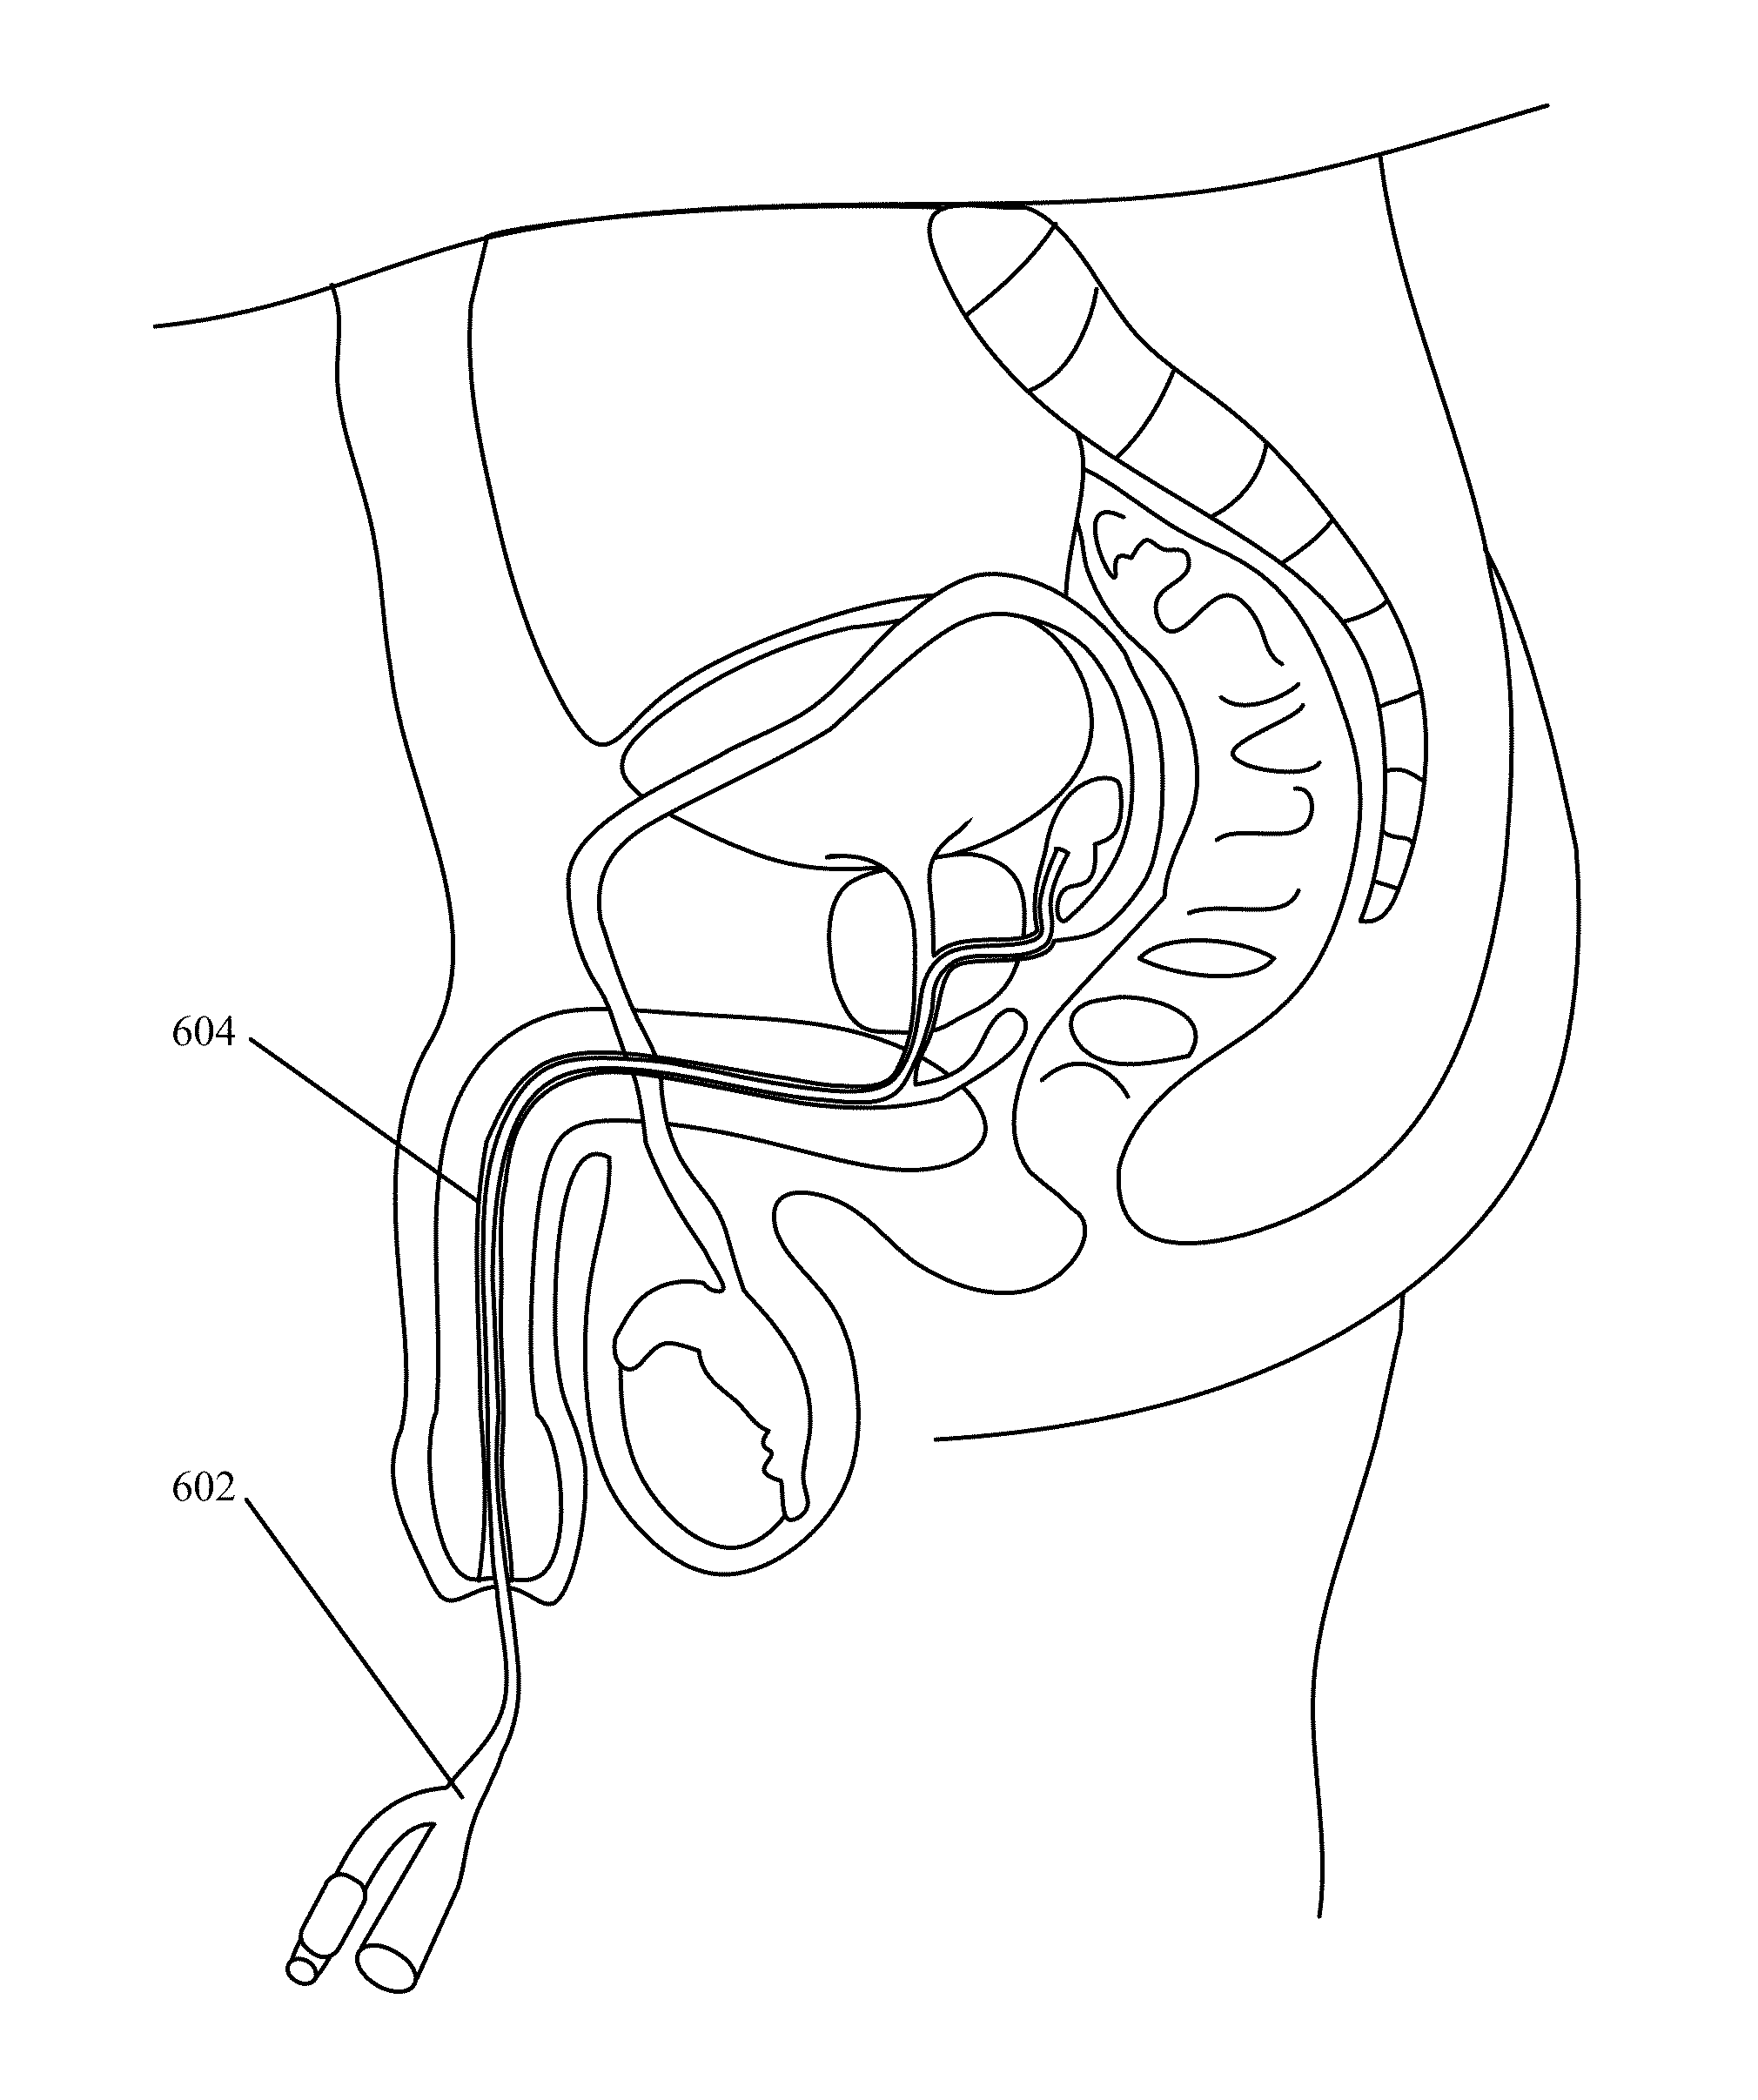 Implantable Drug Delivery Device and Methods of Treating Male Genitourinary and Surrounding Tissues